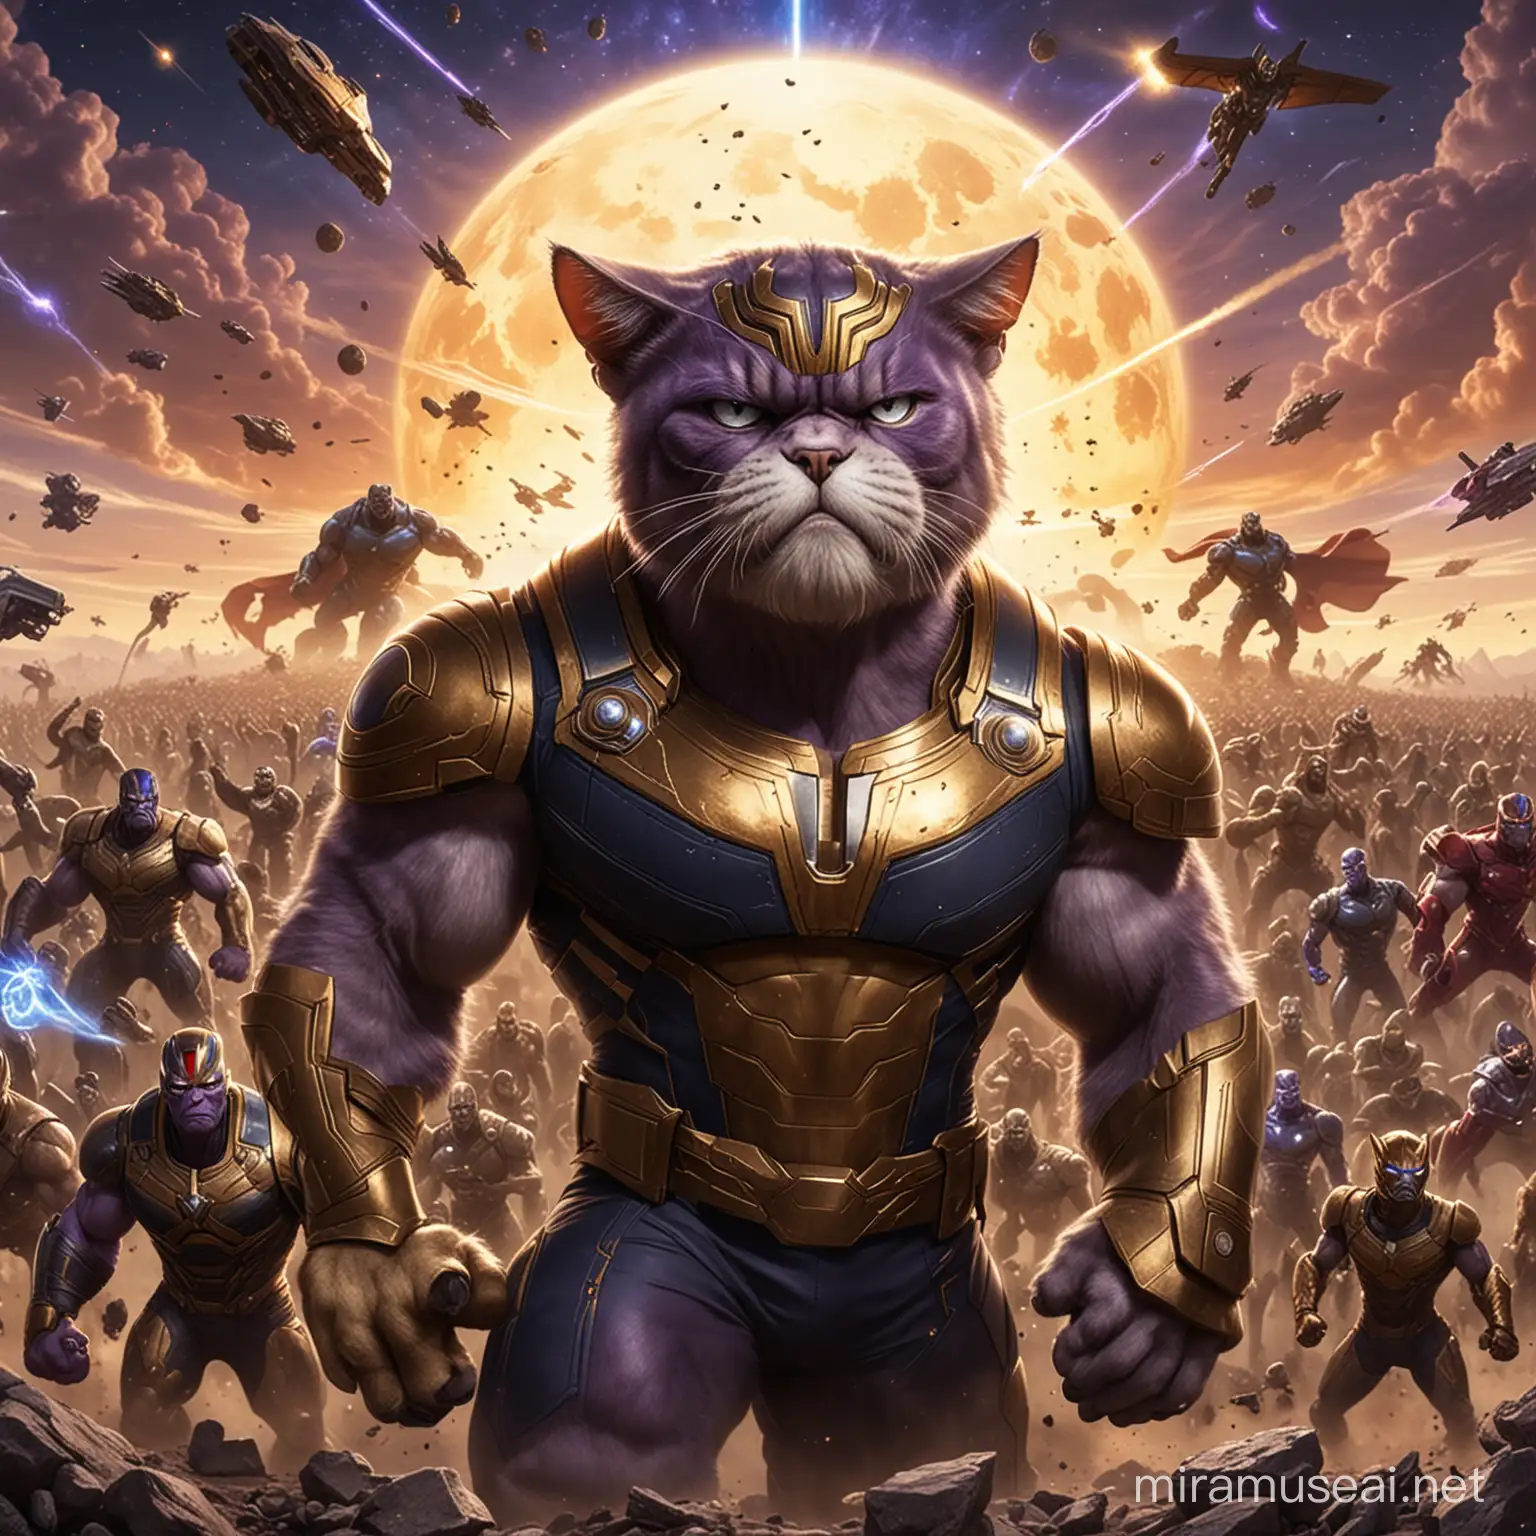 EPIC CAT THANOS ANGRY AND HIS ARMY CAT IN HIS PLANET TITAN